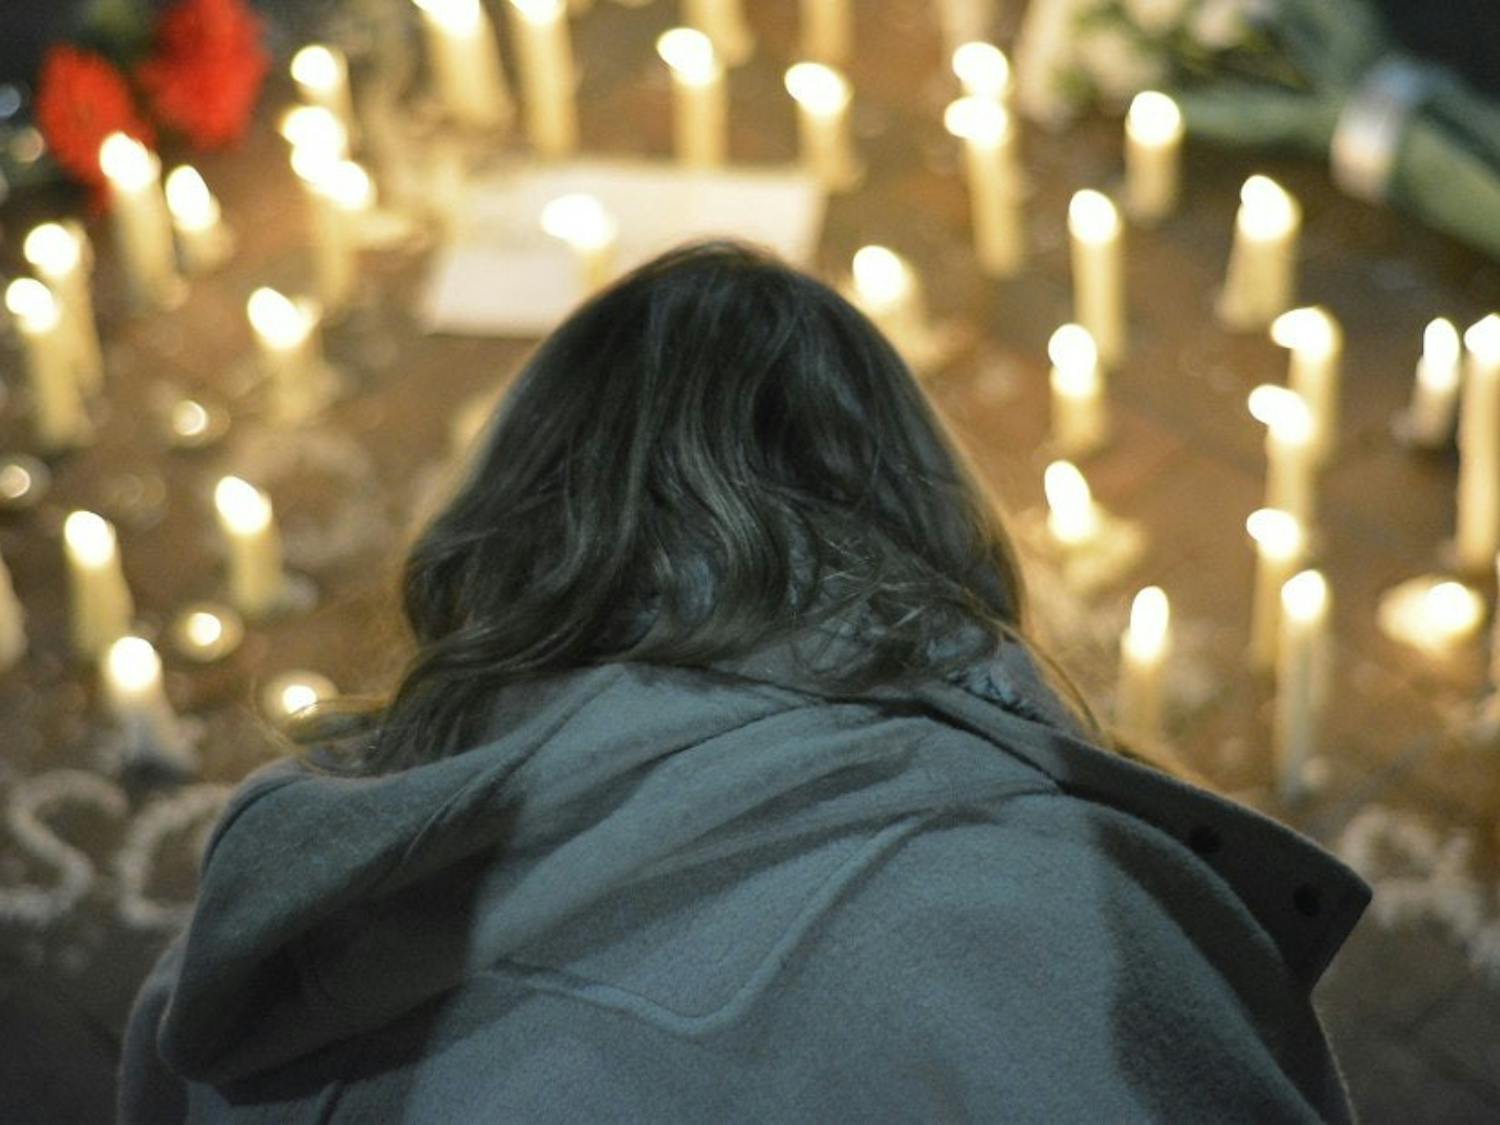 In 2015, a vigil was held for the three students who were killed.